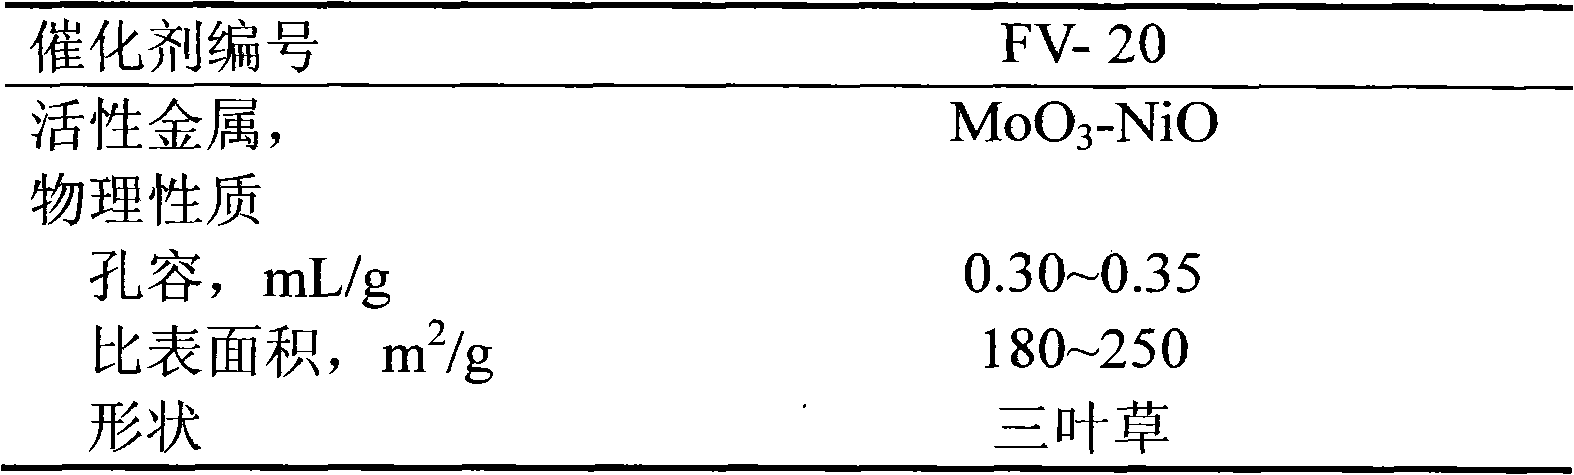 Hydrogenated modification method for petroleum wax substance